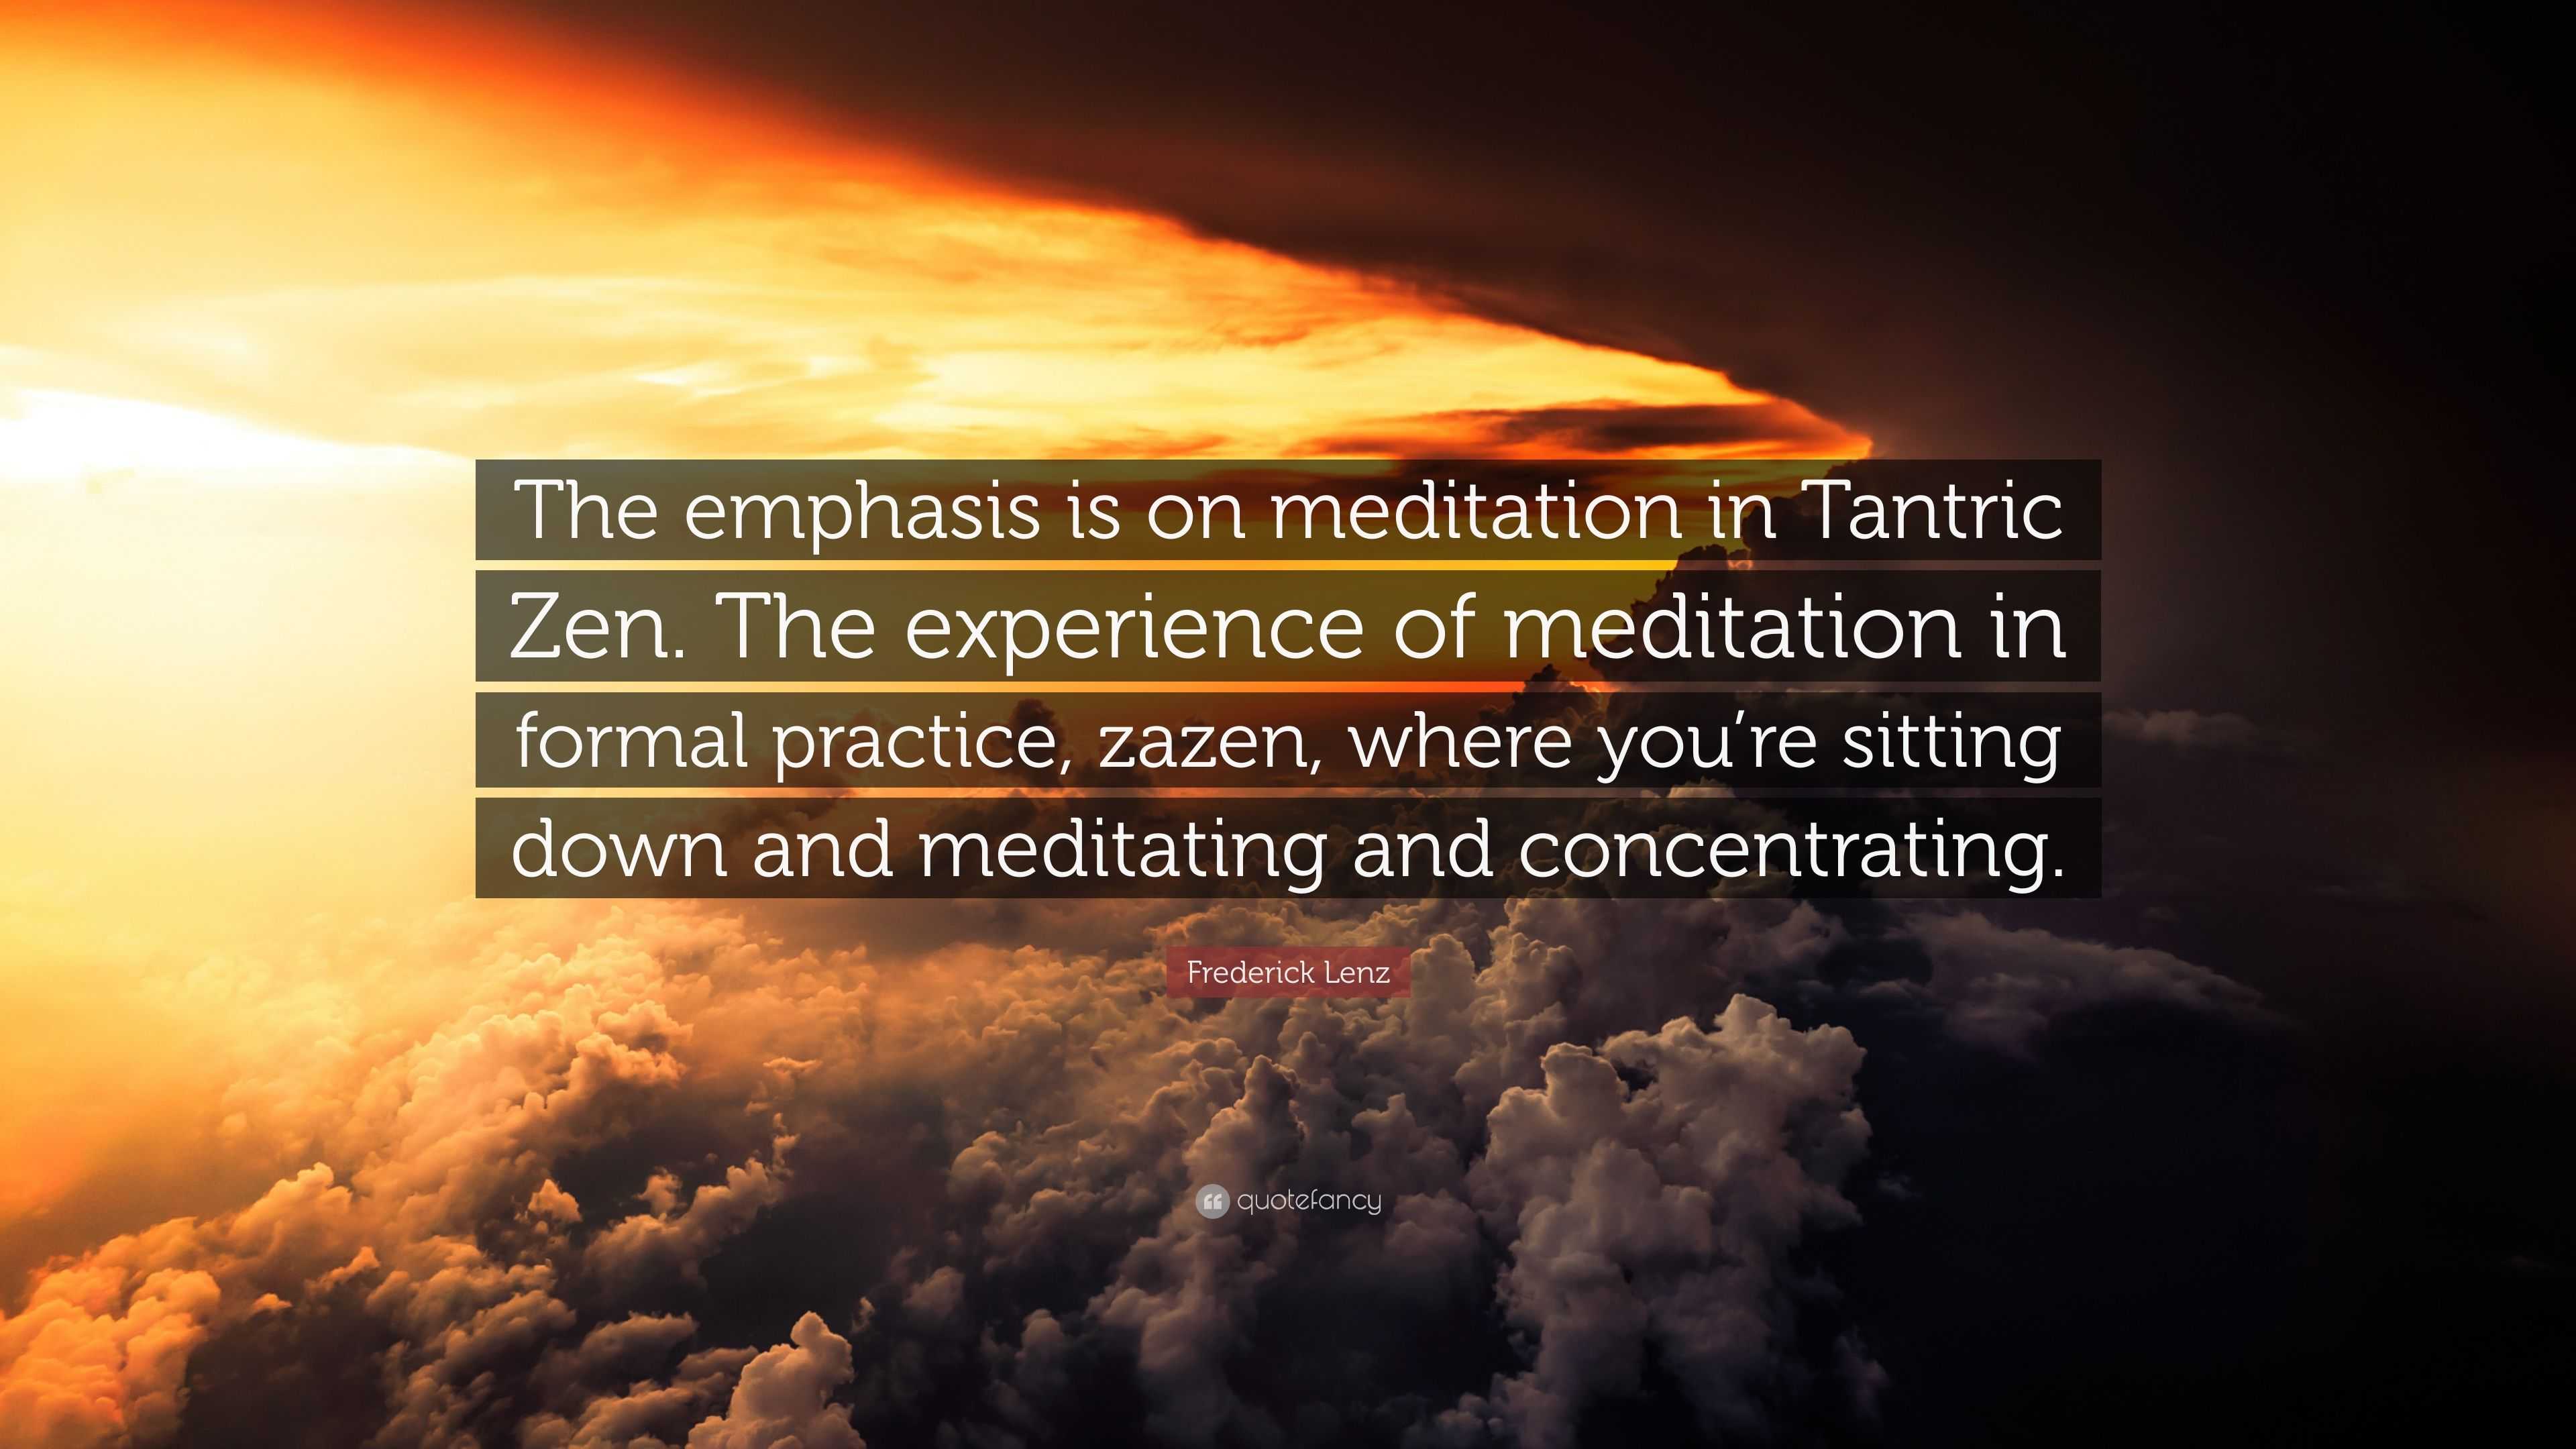 Frederick Lenz Quote: “The emphasis is on meditation in Tantric Zen ...